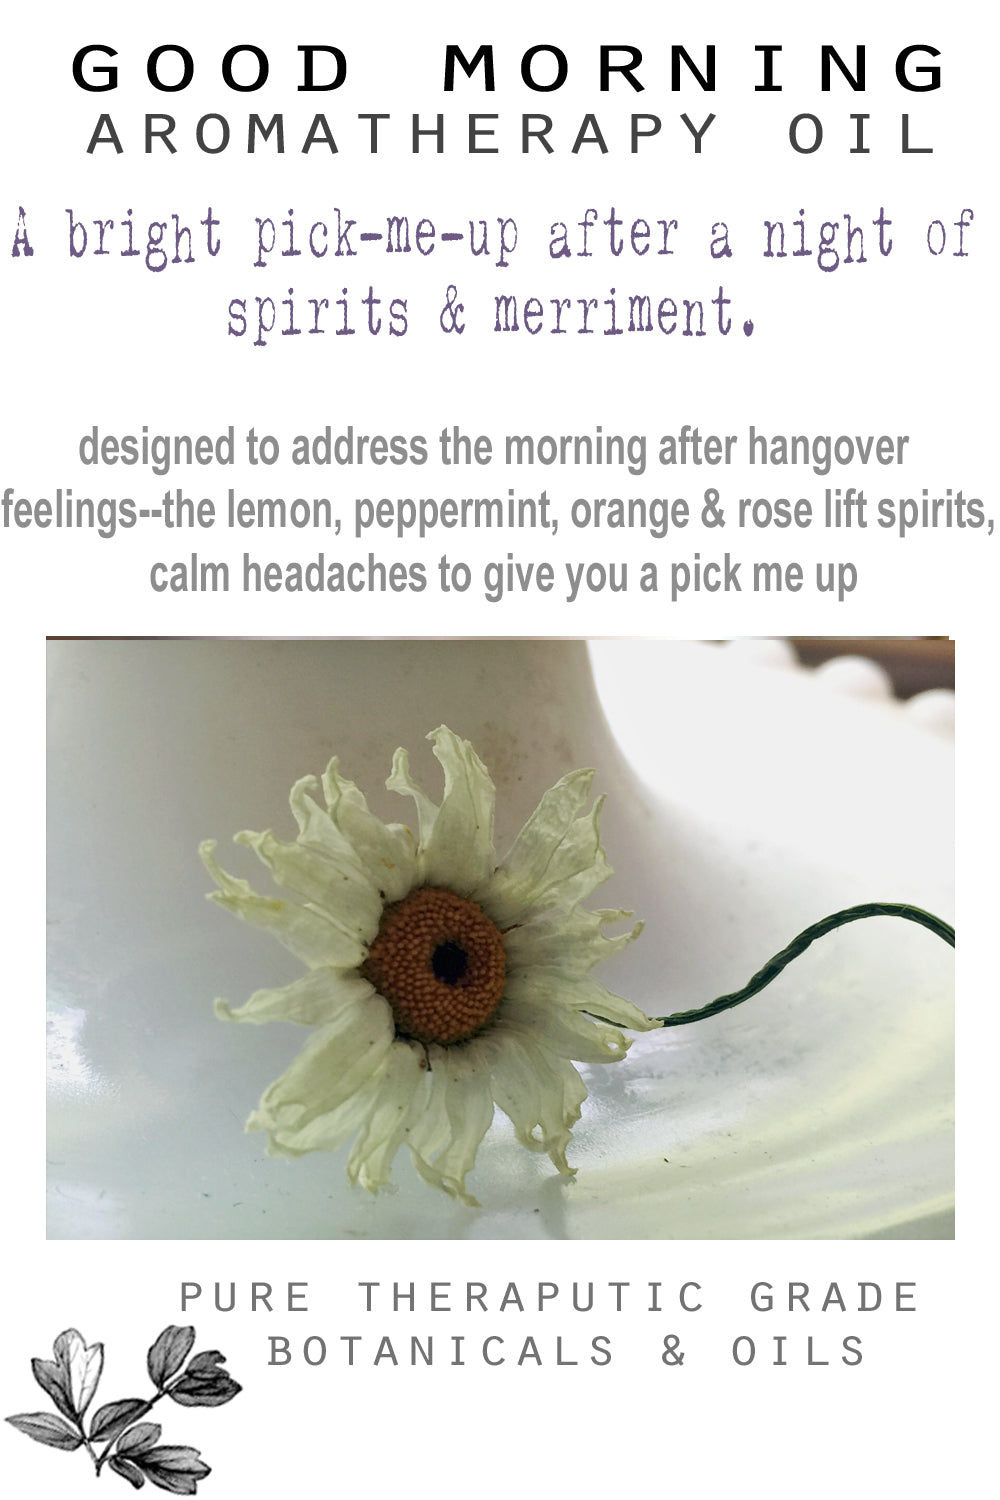 Good Morning Intention Oil- a pick me up after a night of merryment | Roll on Bottle | Aromatherapy Oil | Herbal Sachet | - Lizzy Lane Farm Apothecary